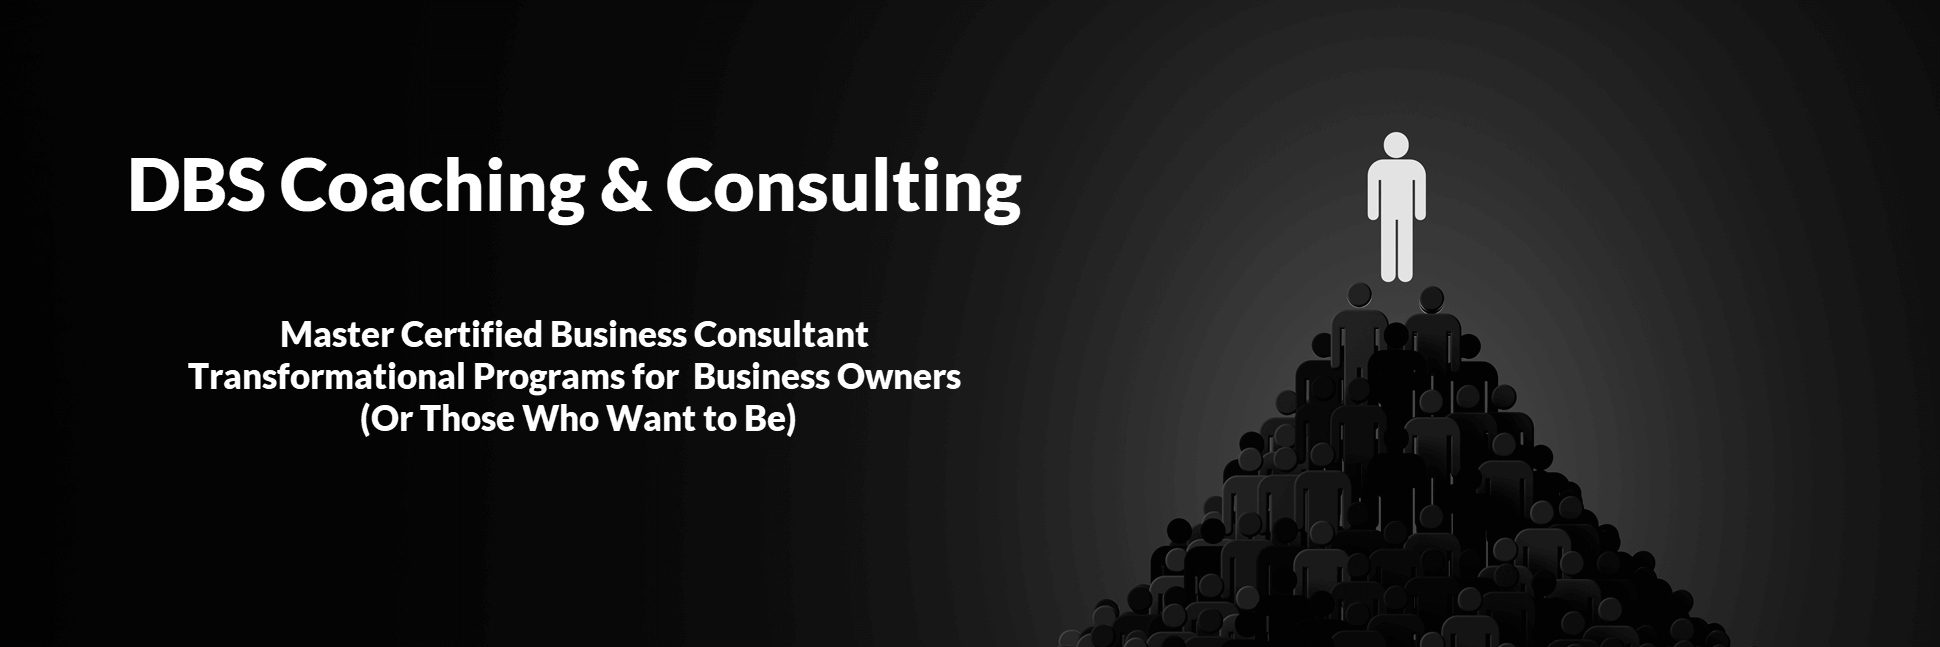 image shows DBS Coaching and Consulting banner